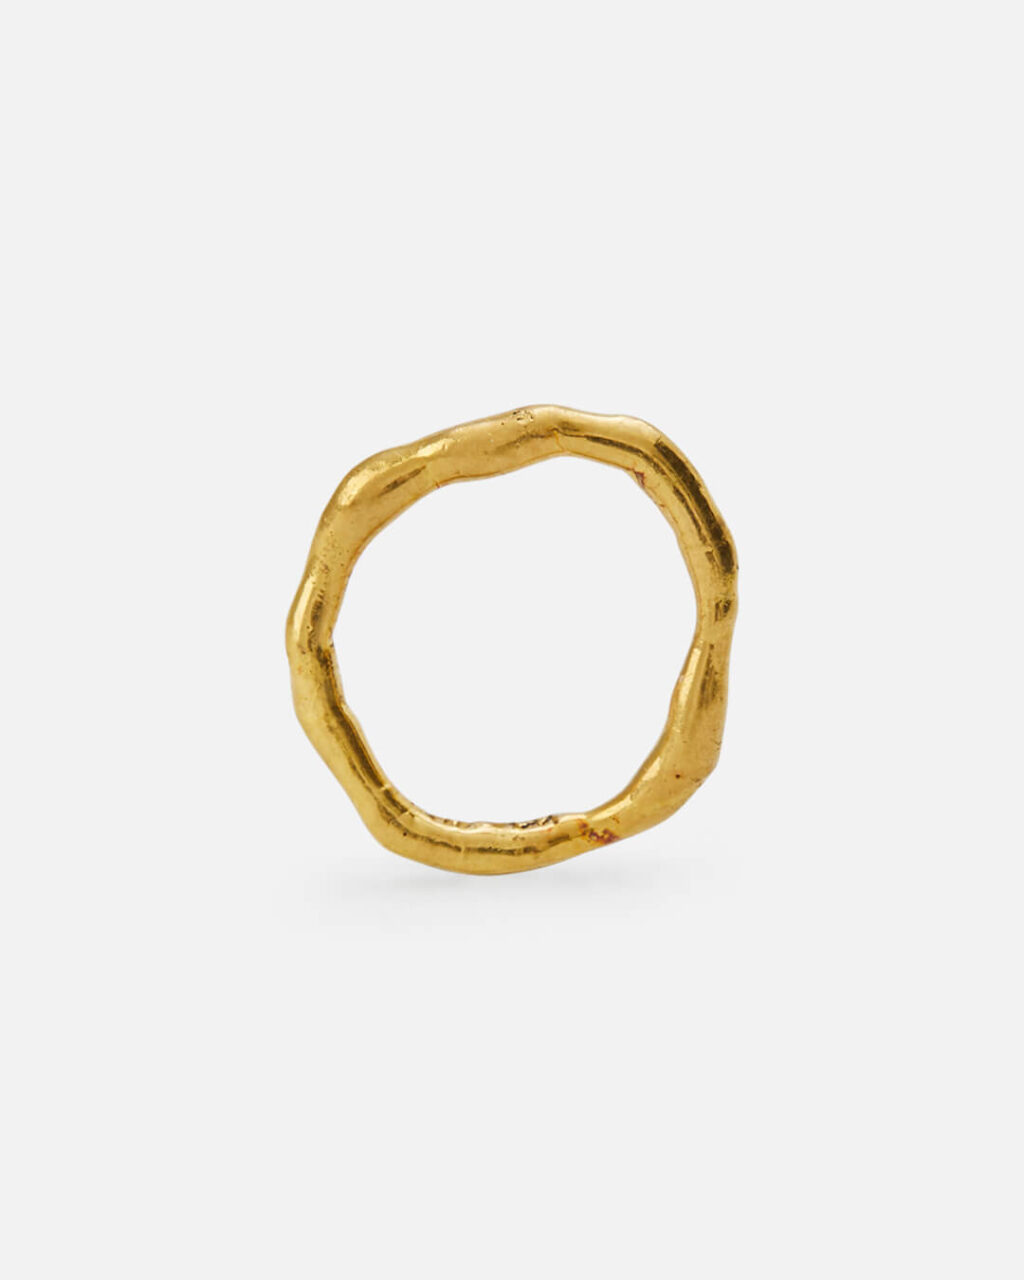 melted fine gold ring